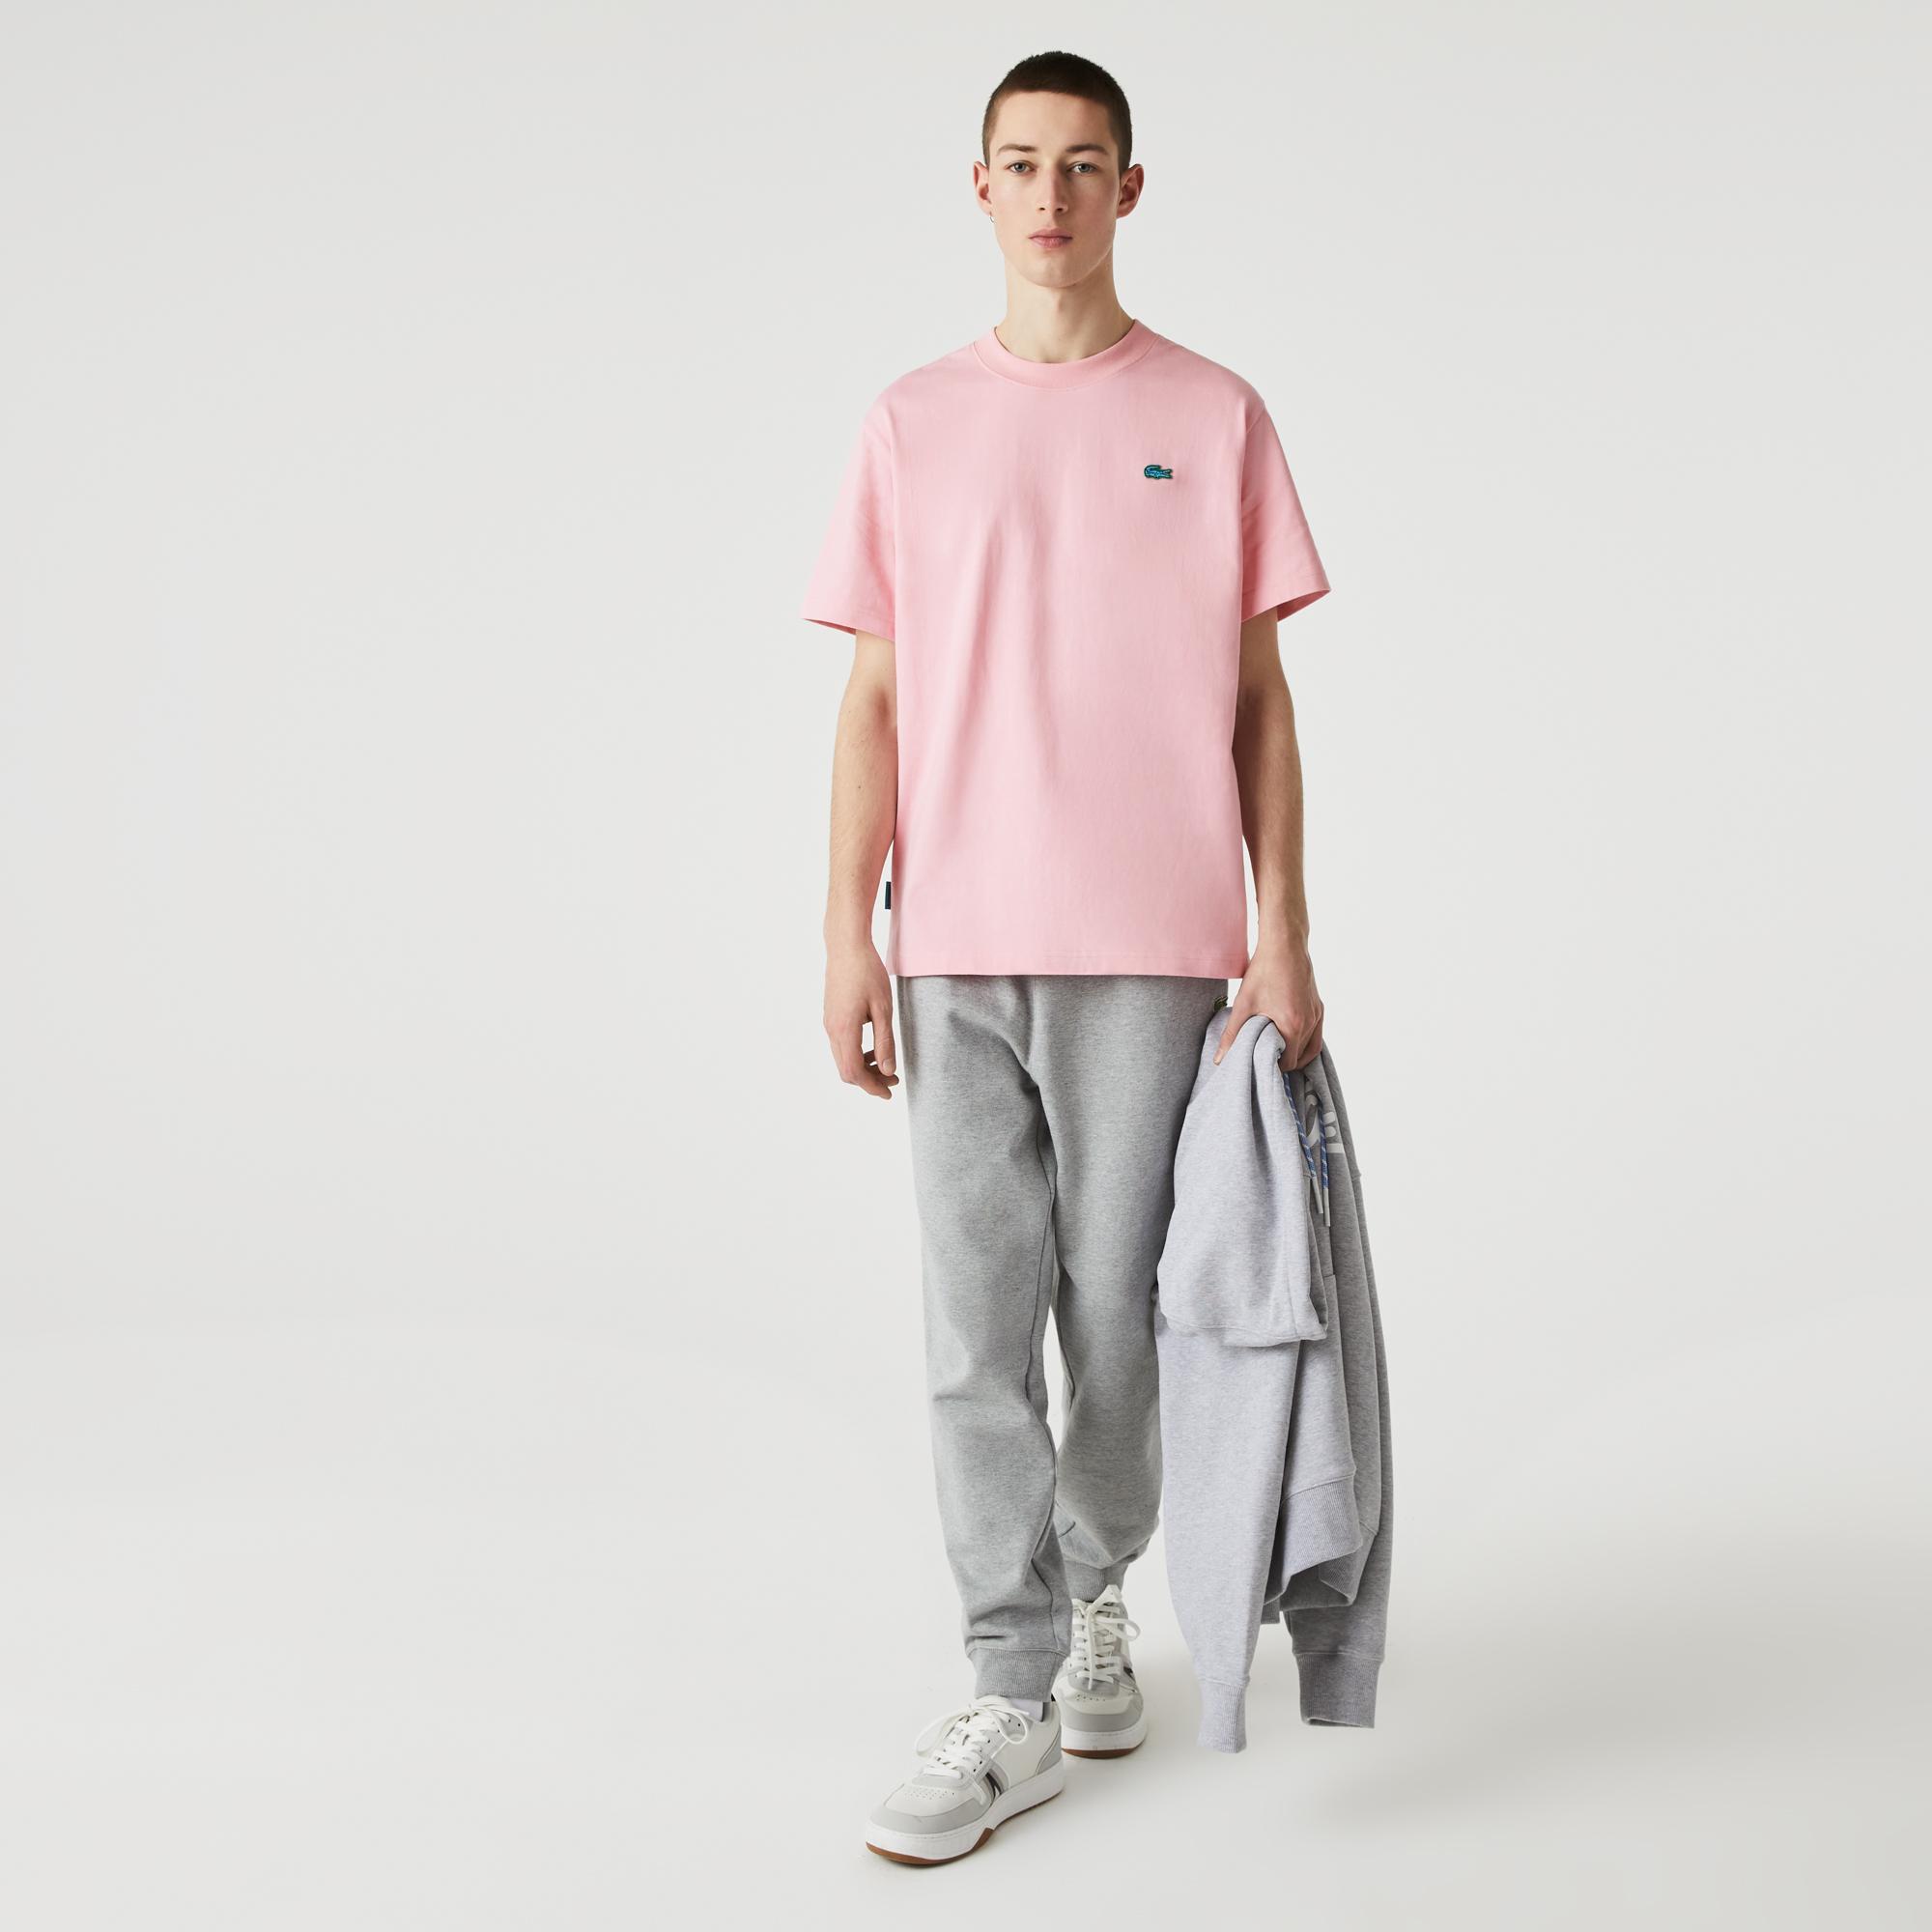 Lacoste L!VE Unisex Relaxed Fit Bisiklet Yaka Pembe T-Shirt. 7